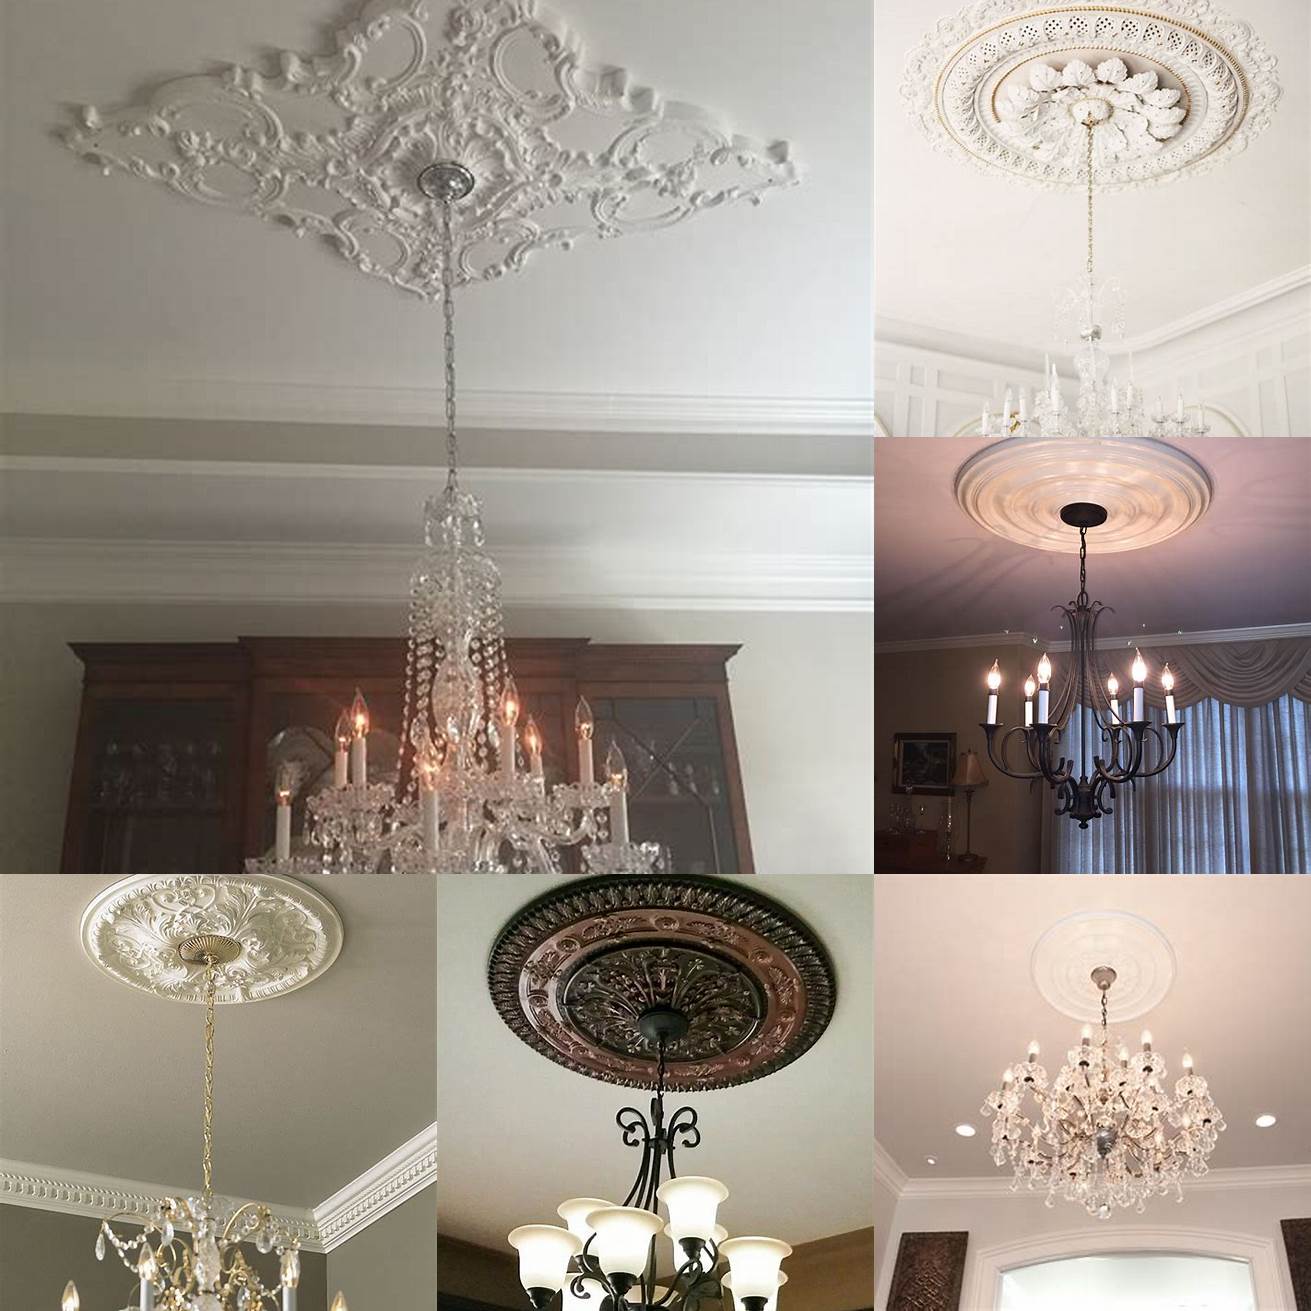 Ceiling medallions are decorative elements that can add texture and visual interest to your ceiling